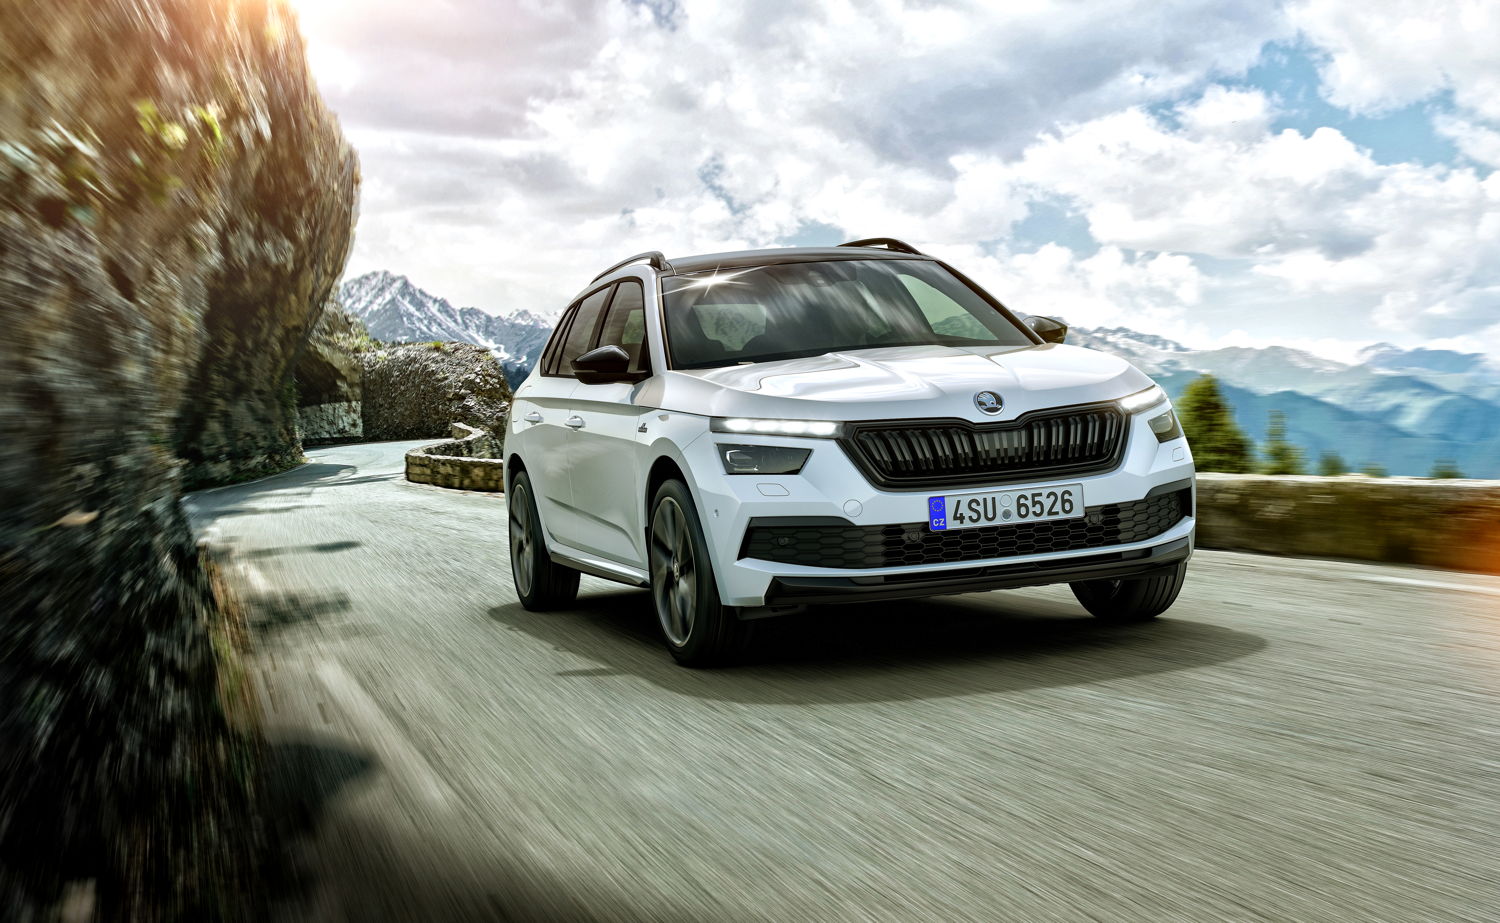 ŠKODA is extending its tradition of offering a sporty, lifestyle-oriented MONTE CARLO trim level to the new KAMIQ city SUV.